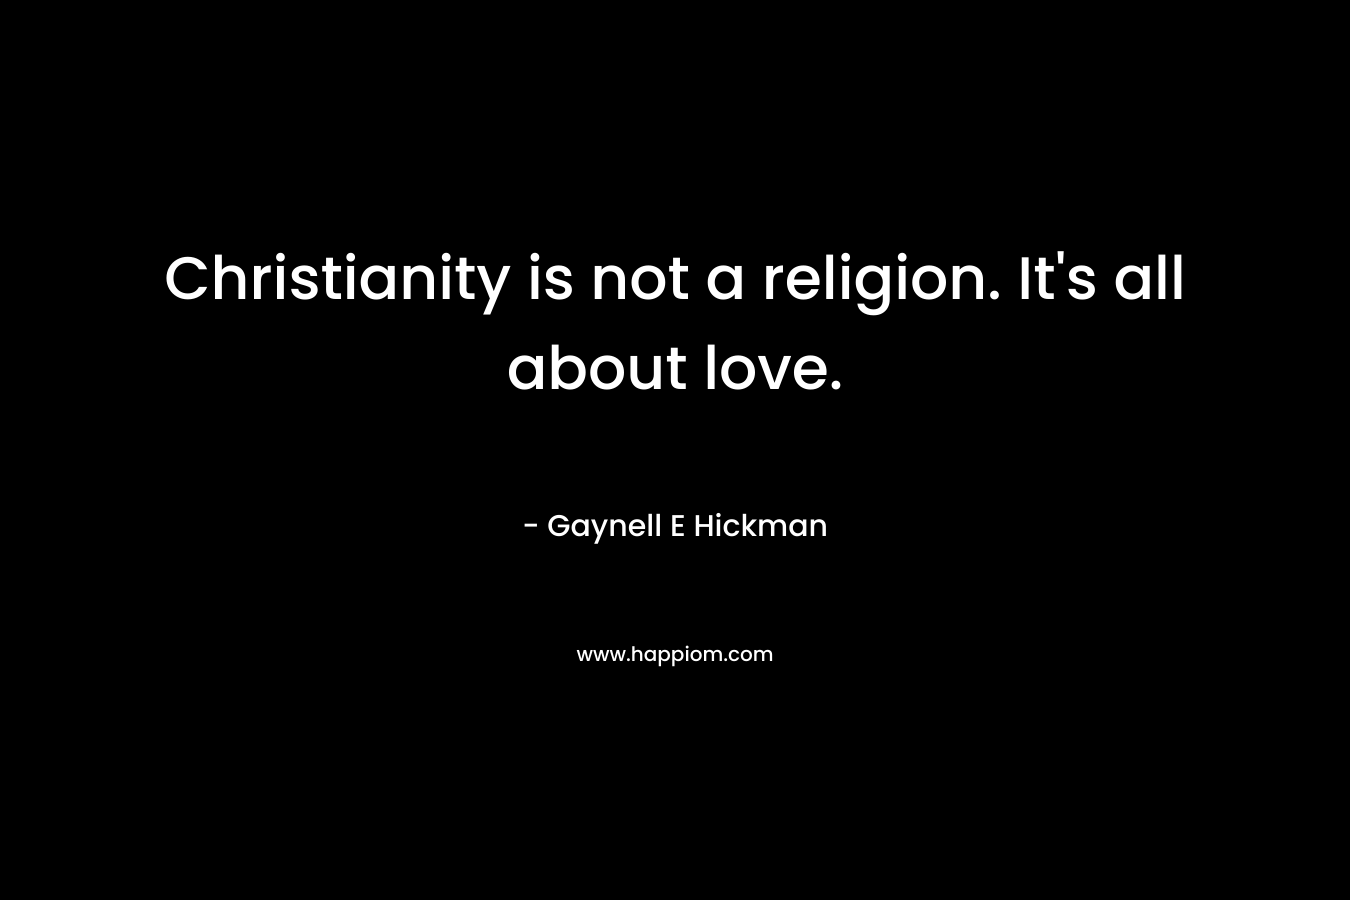 Christianity is not a religion. It’s all about love. – Gaynell E Hickman